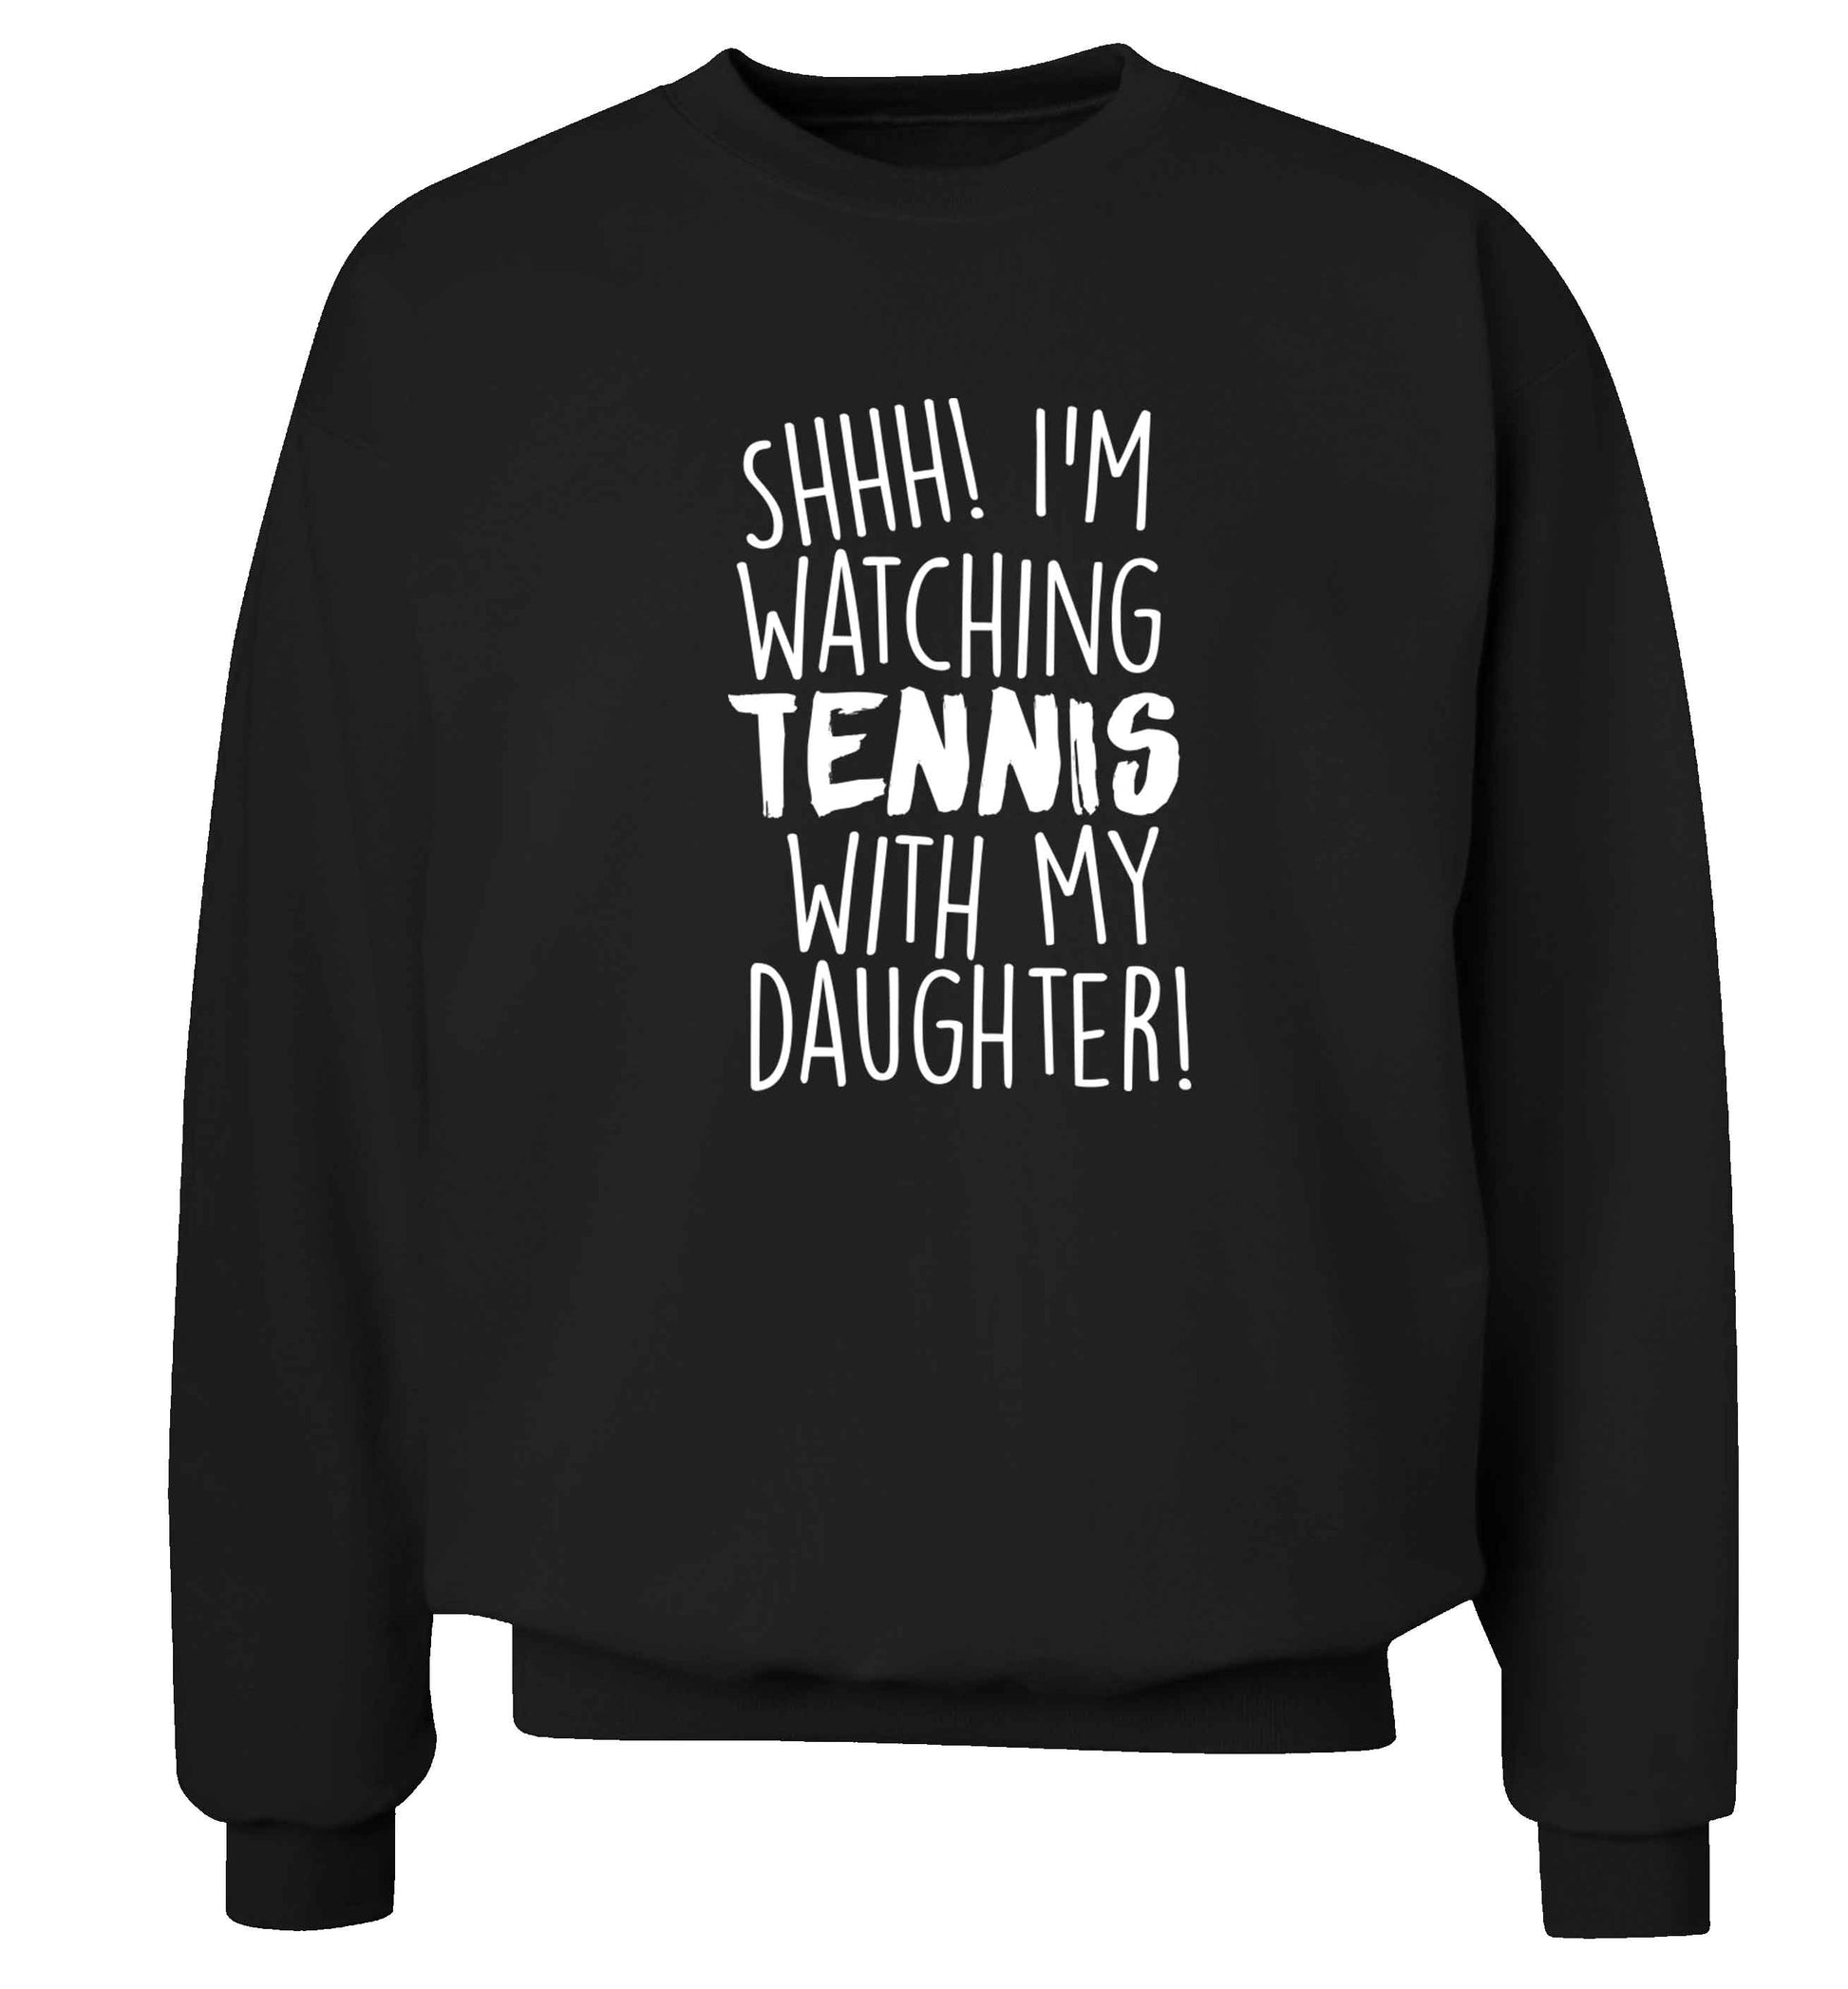 Shh! I'm watching tennis with my daughter! Adult's unisex black Sweater 2XL